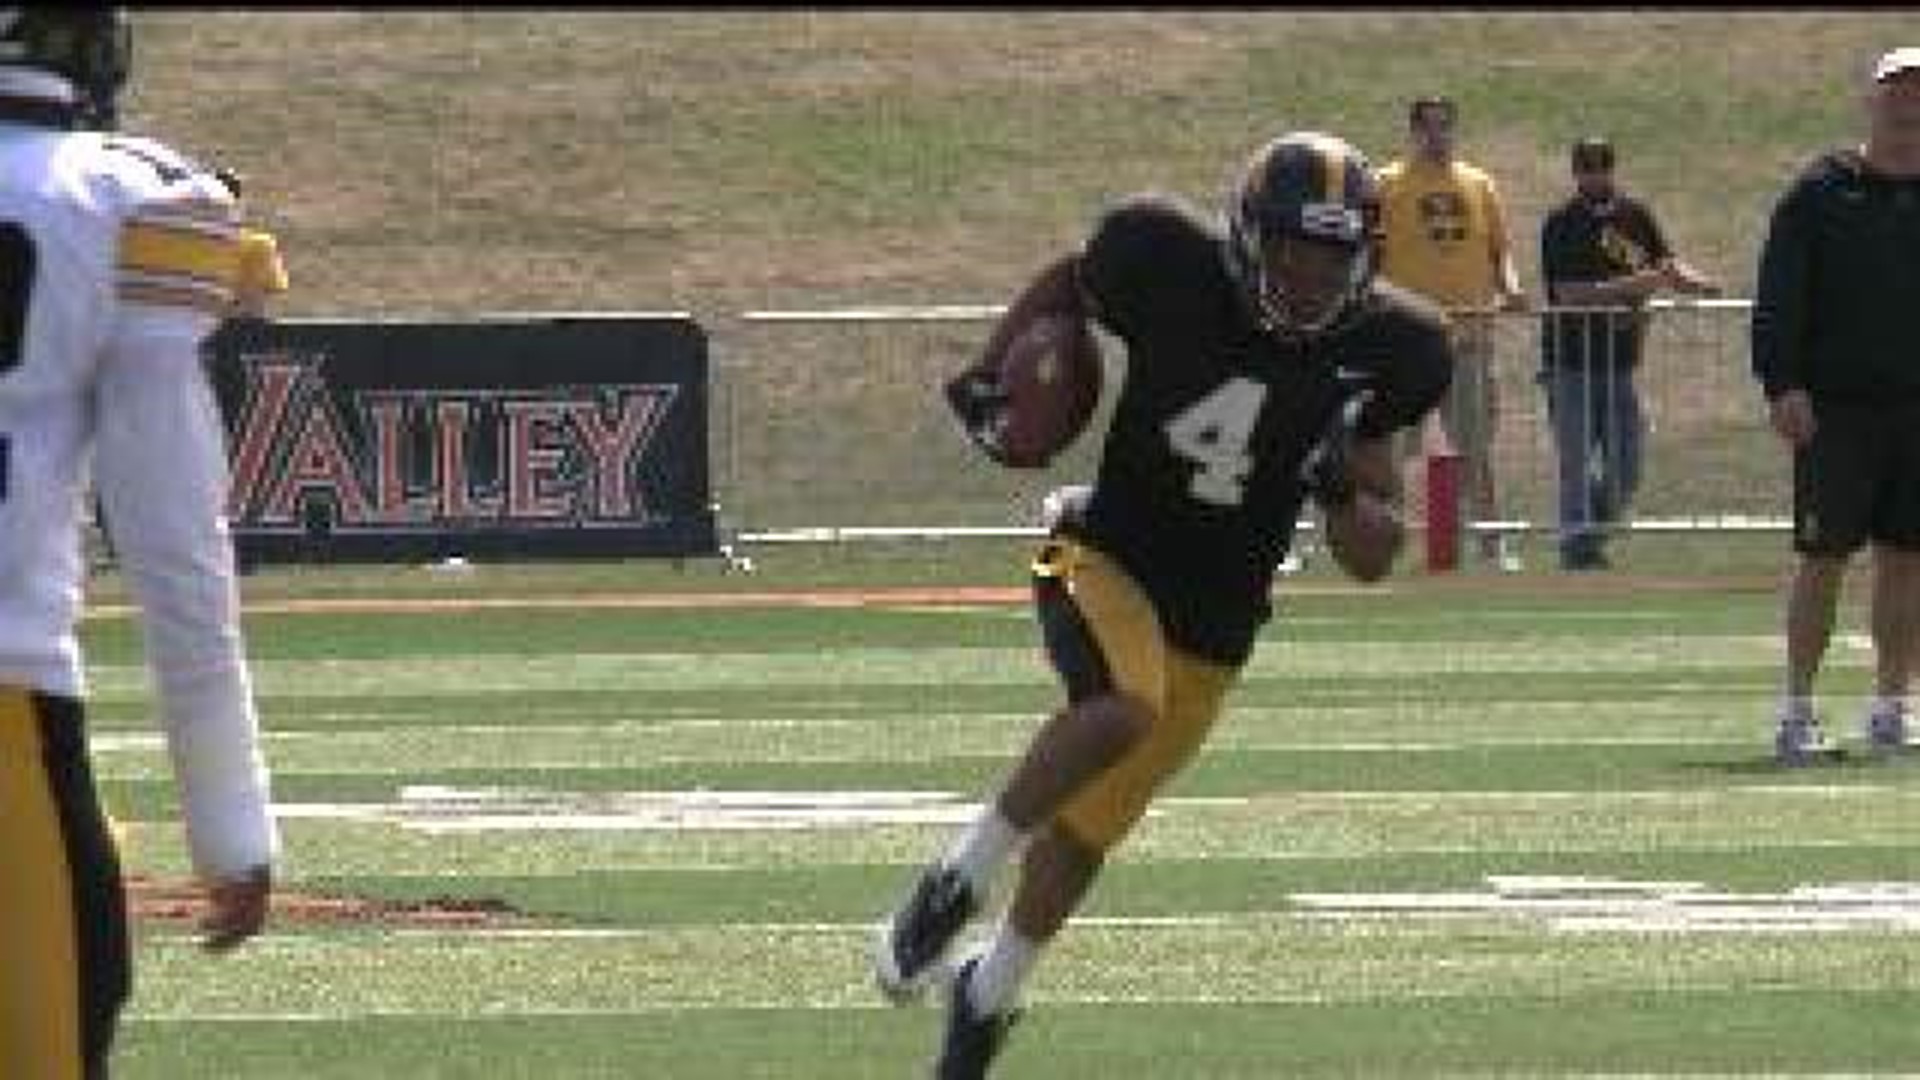 Hawkeyes and Cyclones using Spring to improve